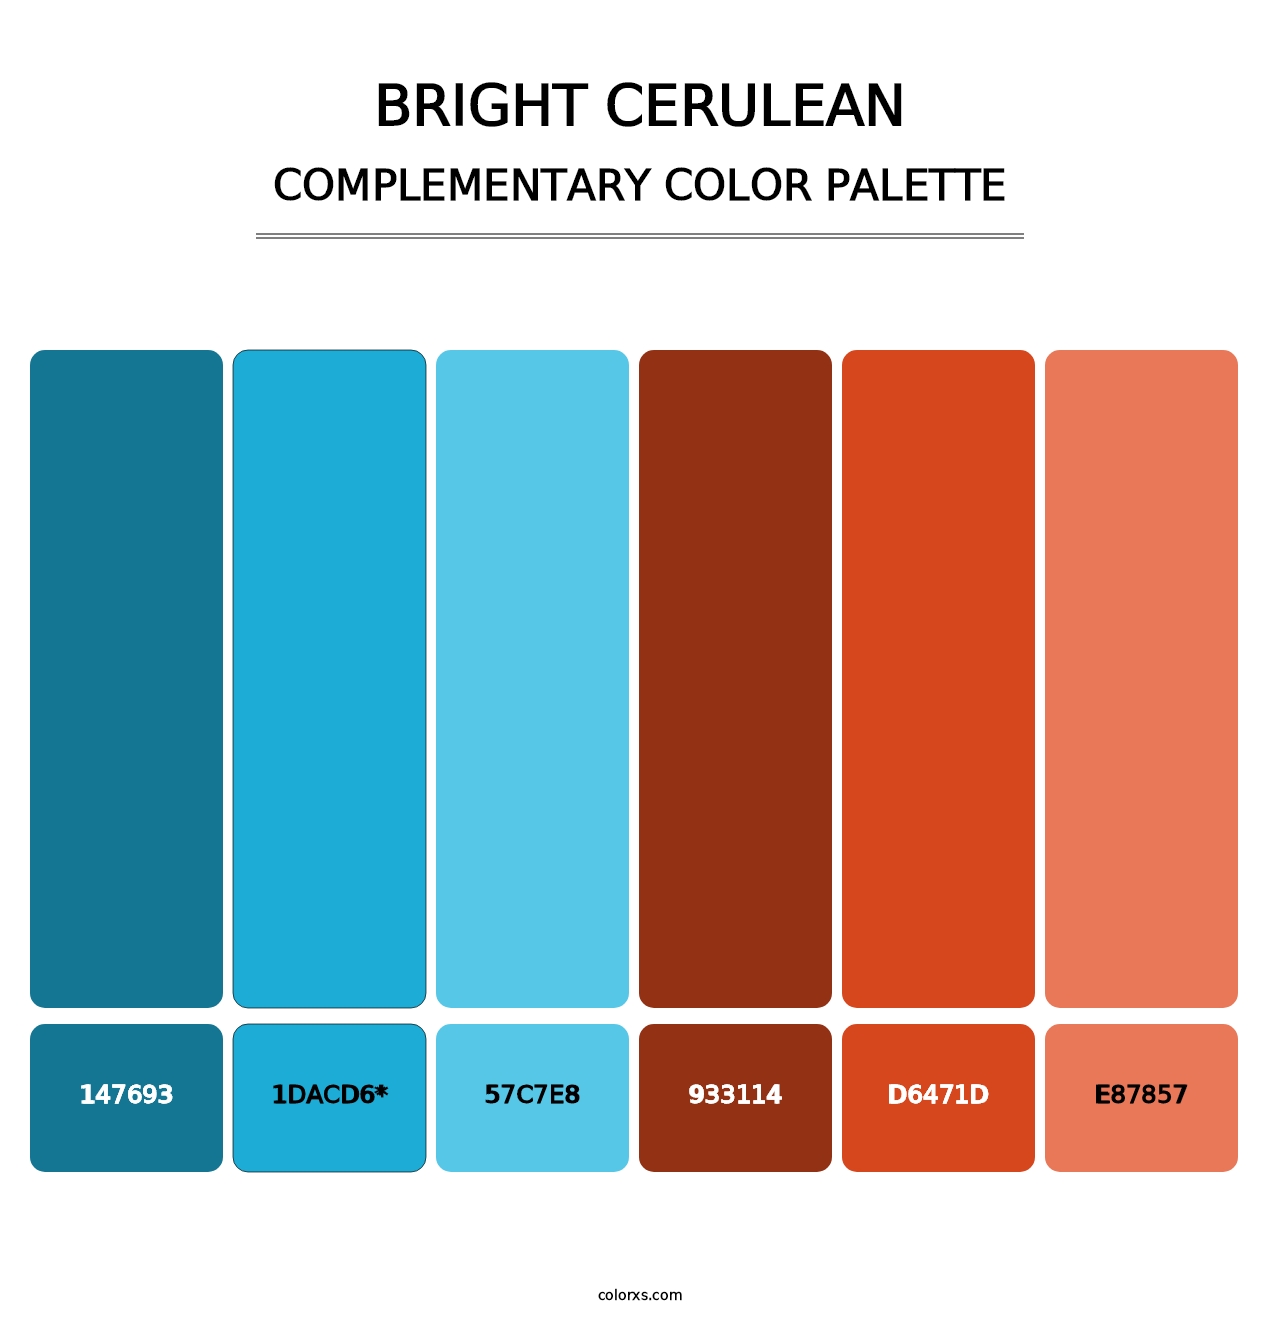 Bright Cerulean - Complementary Color Palette